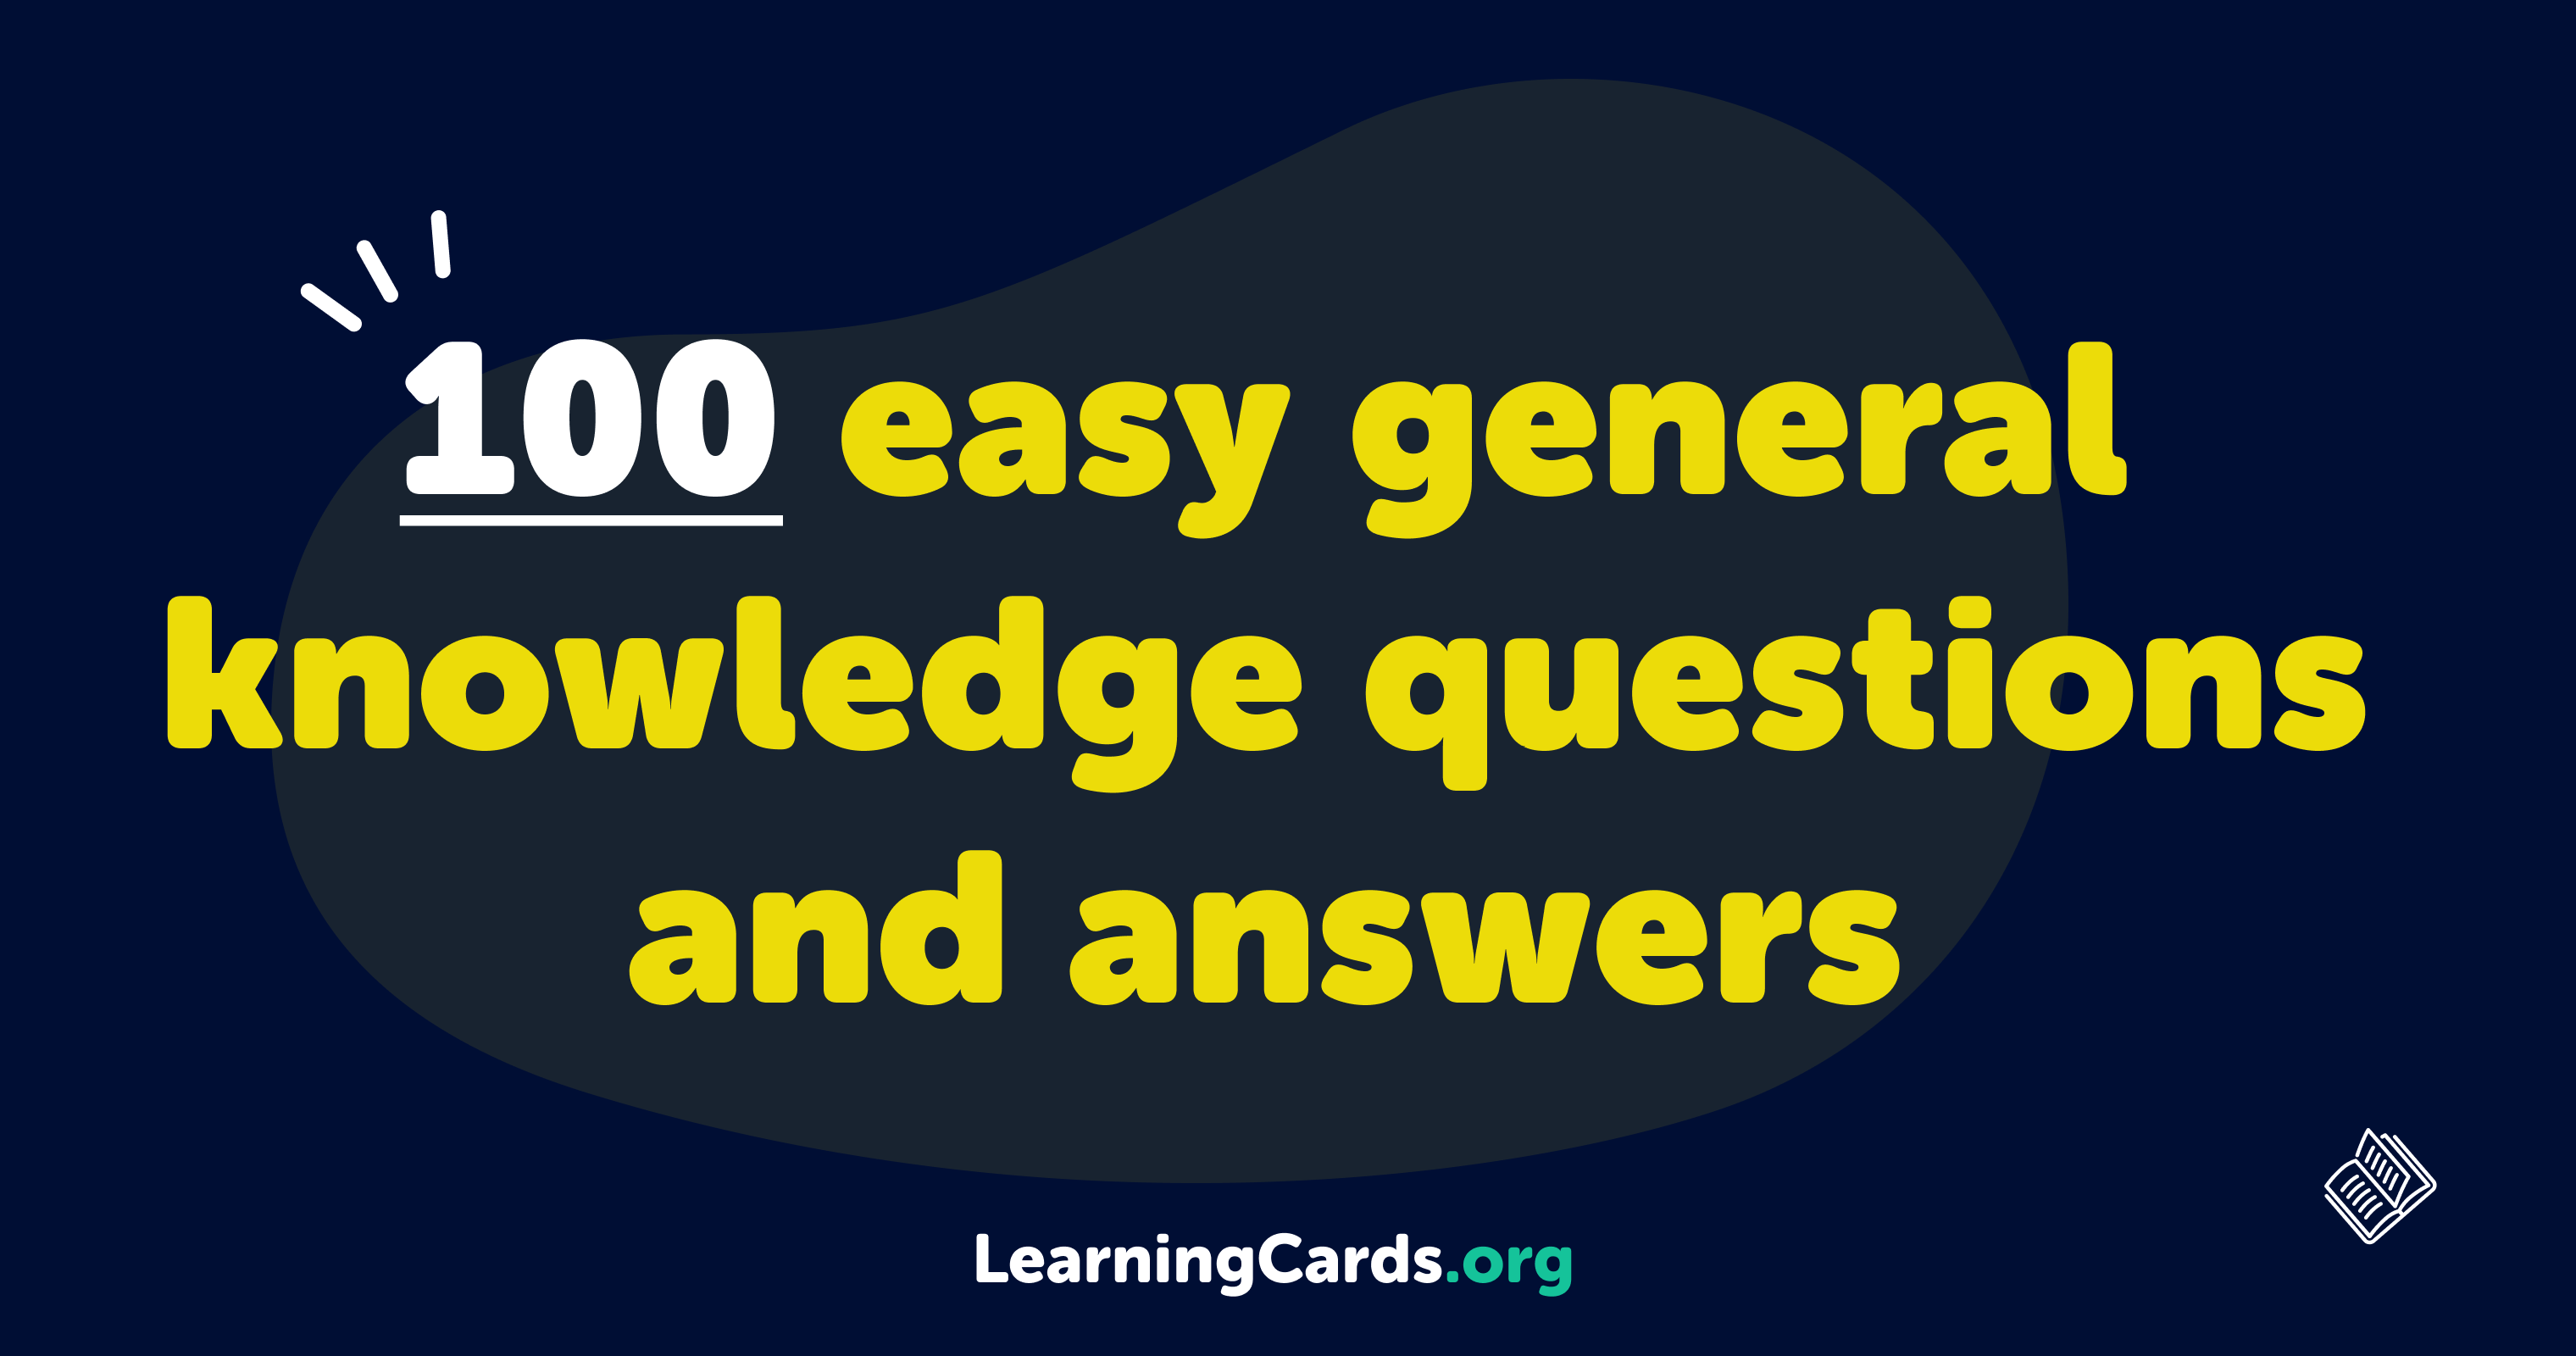 100-easy-general-knowledge-questions-and-answers-learning-cards